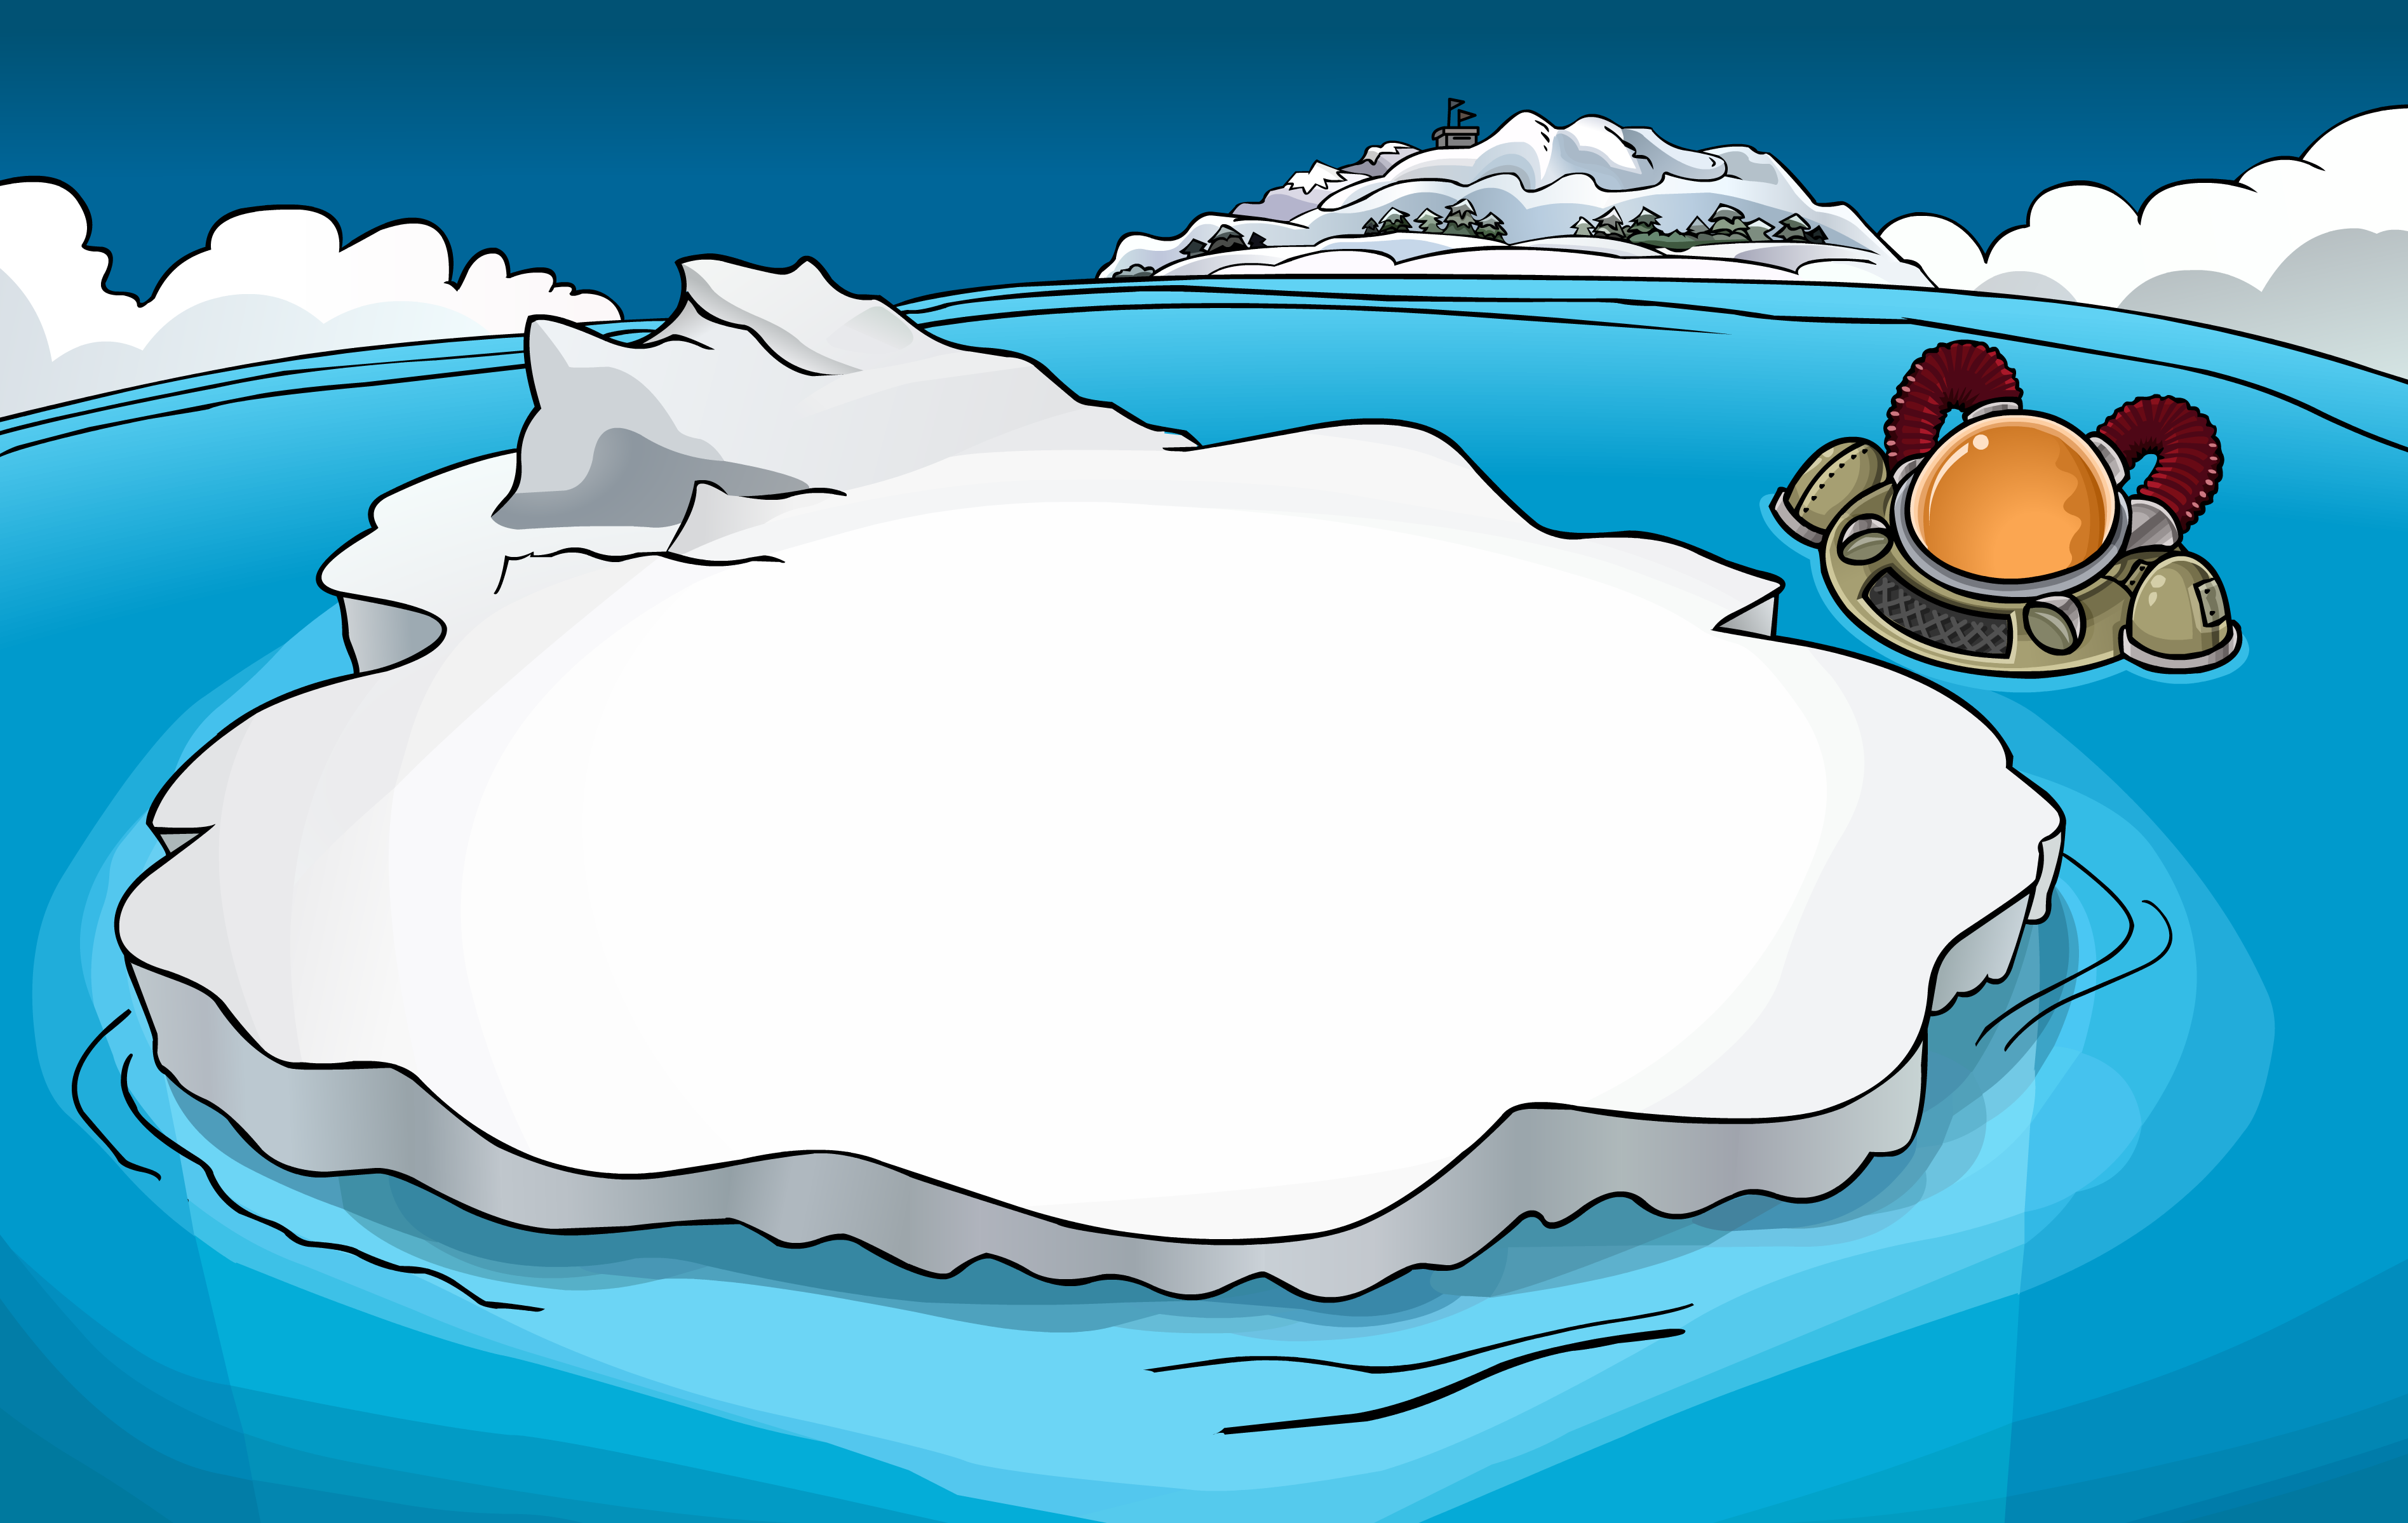 Club Penguin adds fabled iceberg Easter egg to farewell